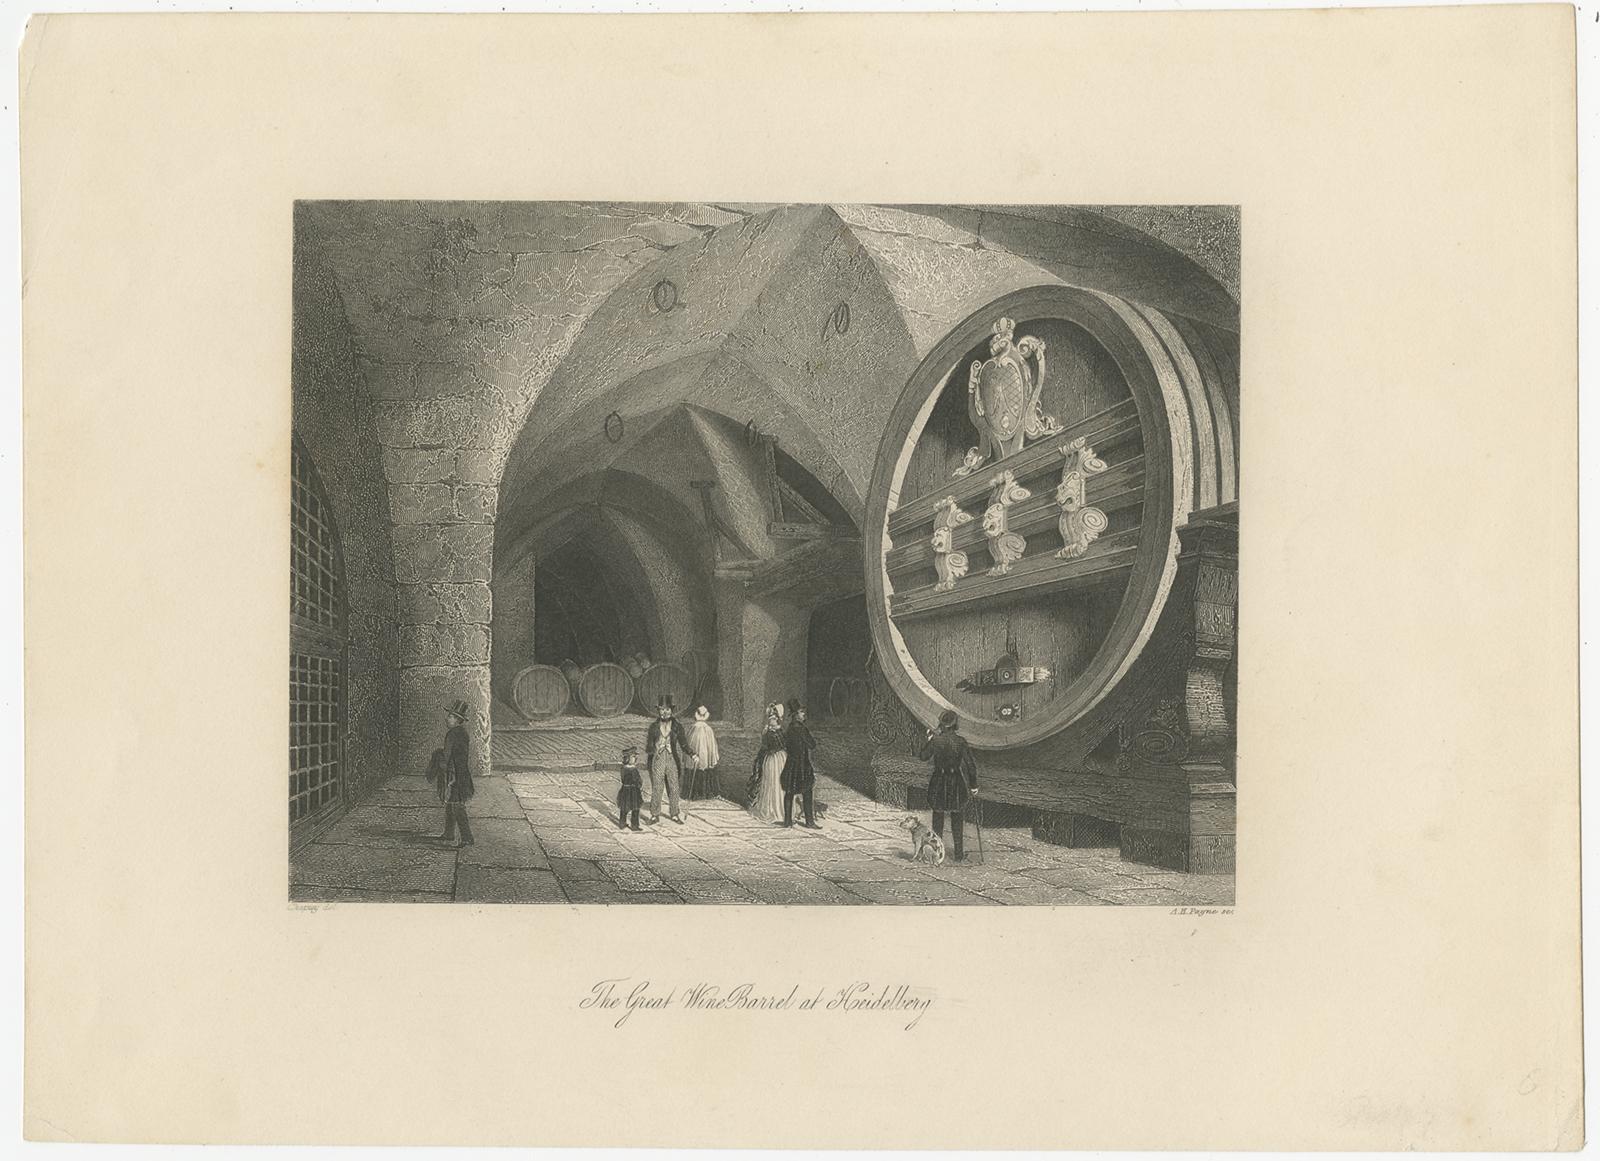 Antique print titled 'The Great Wine Barrel at Heidelberg'. Original antique print of the Heidelberg Tun, or Great Heidelberg Tun, is an extremely large wine vat contained within the cellars of Heidelberg Castle. Engraved by Payne after Chapray.